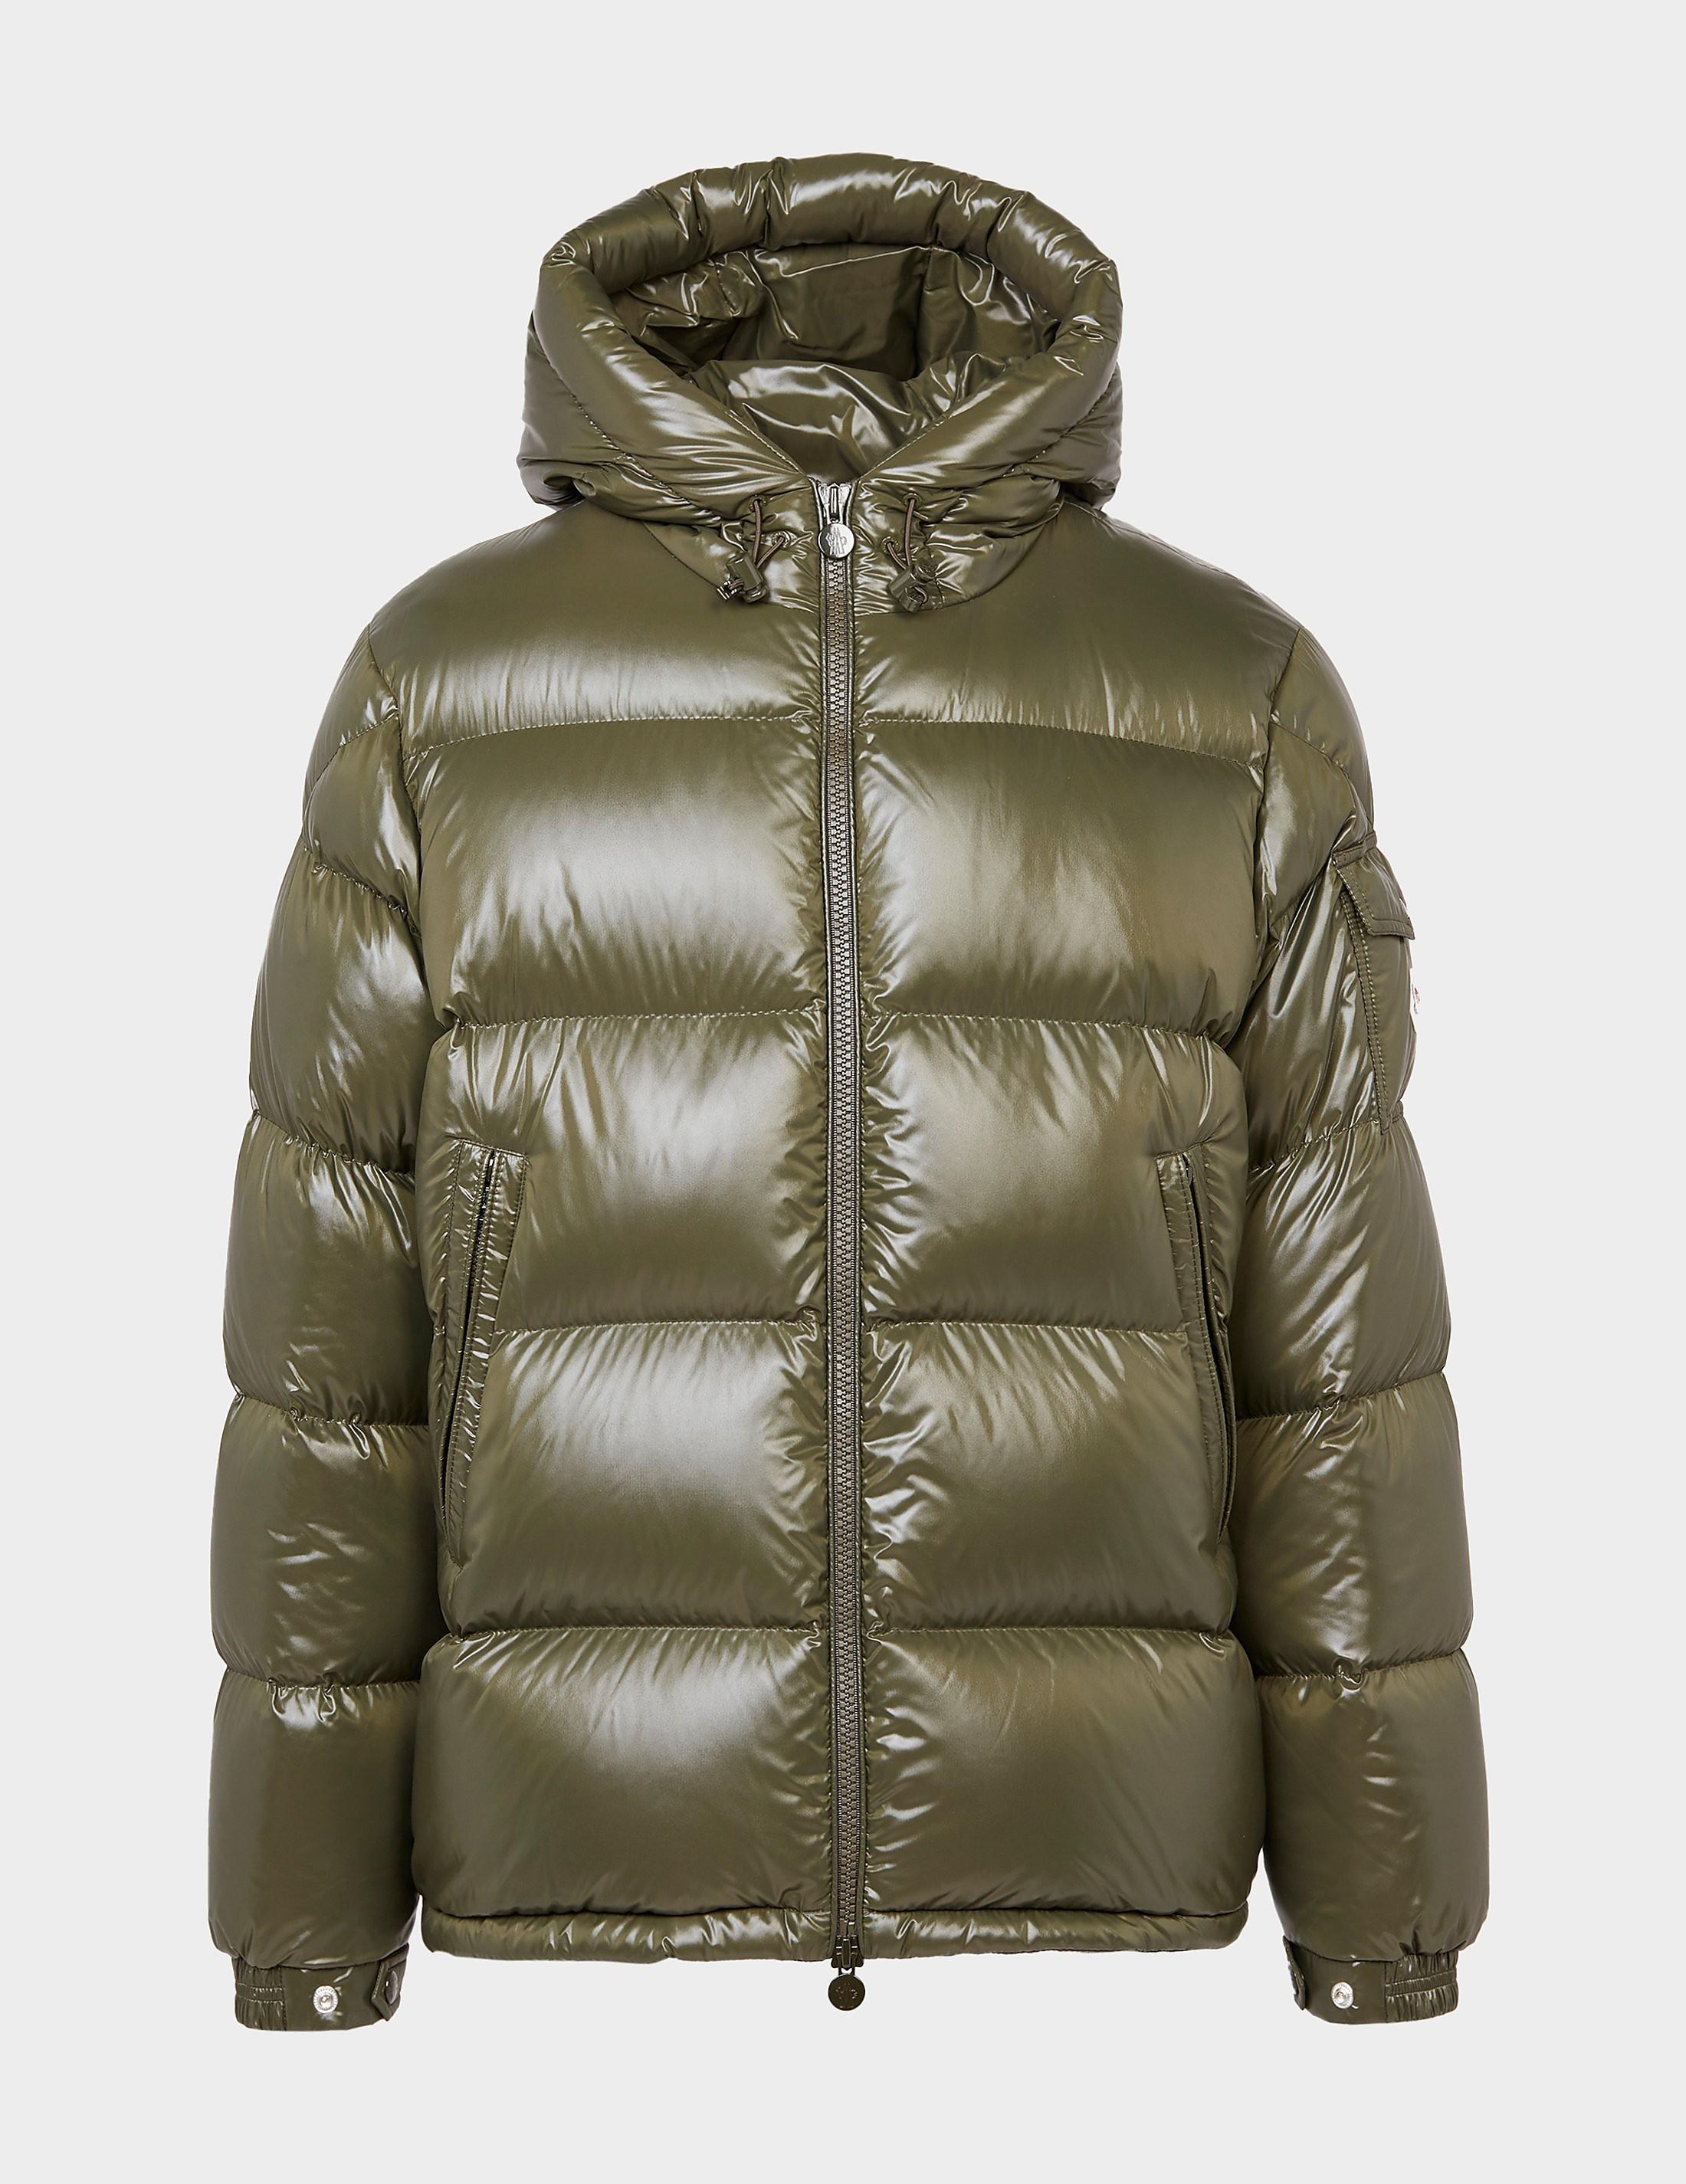 Moncler Synthetic Ecrins Gloss Padded Jacket in Green for Men - Lyst